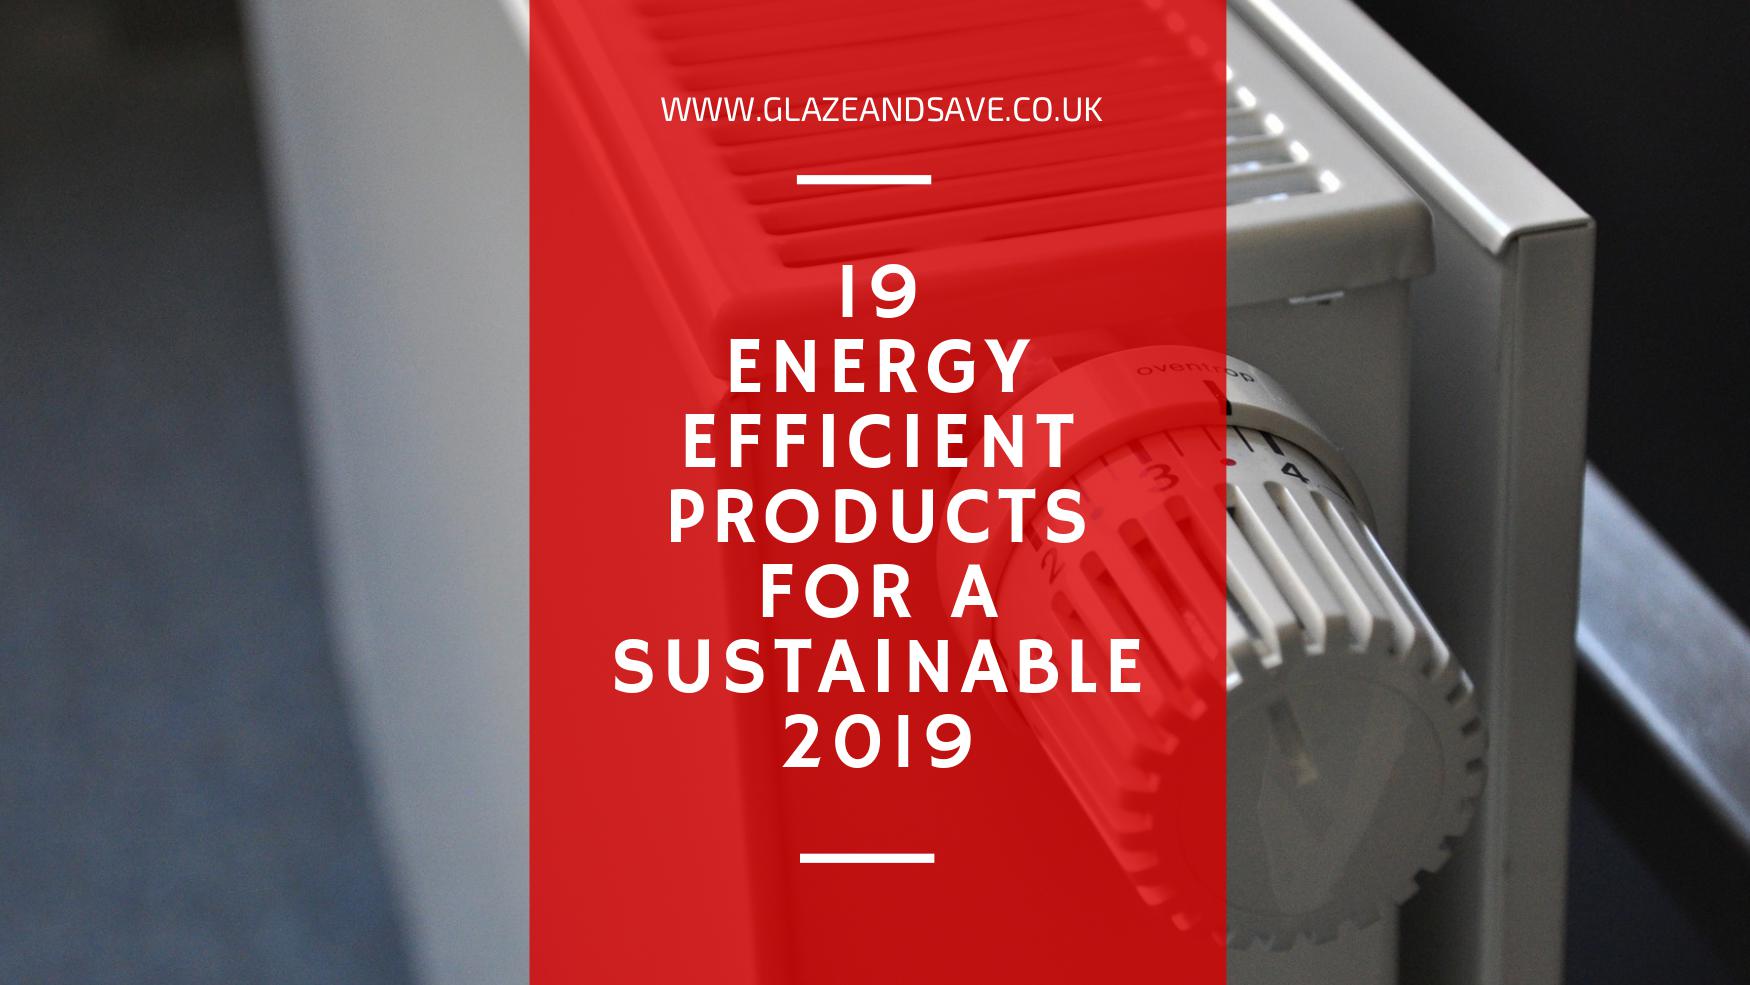 19 Energy Efficient Products for 2019 by Glaze & Save bespoke magnetic secondary glazing and draught proofing systems.